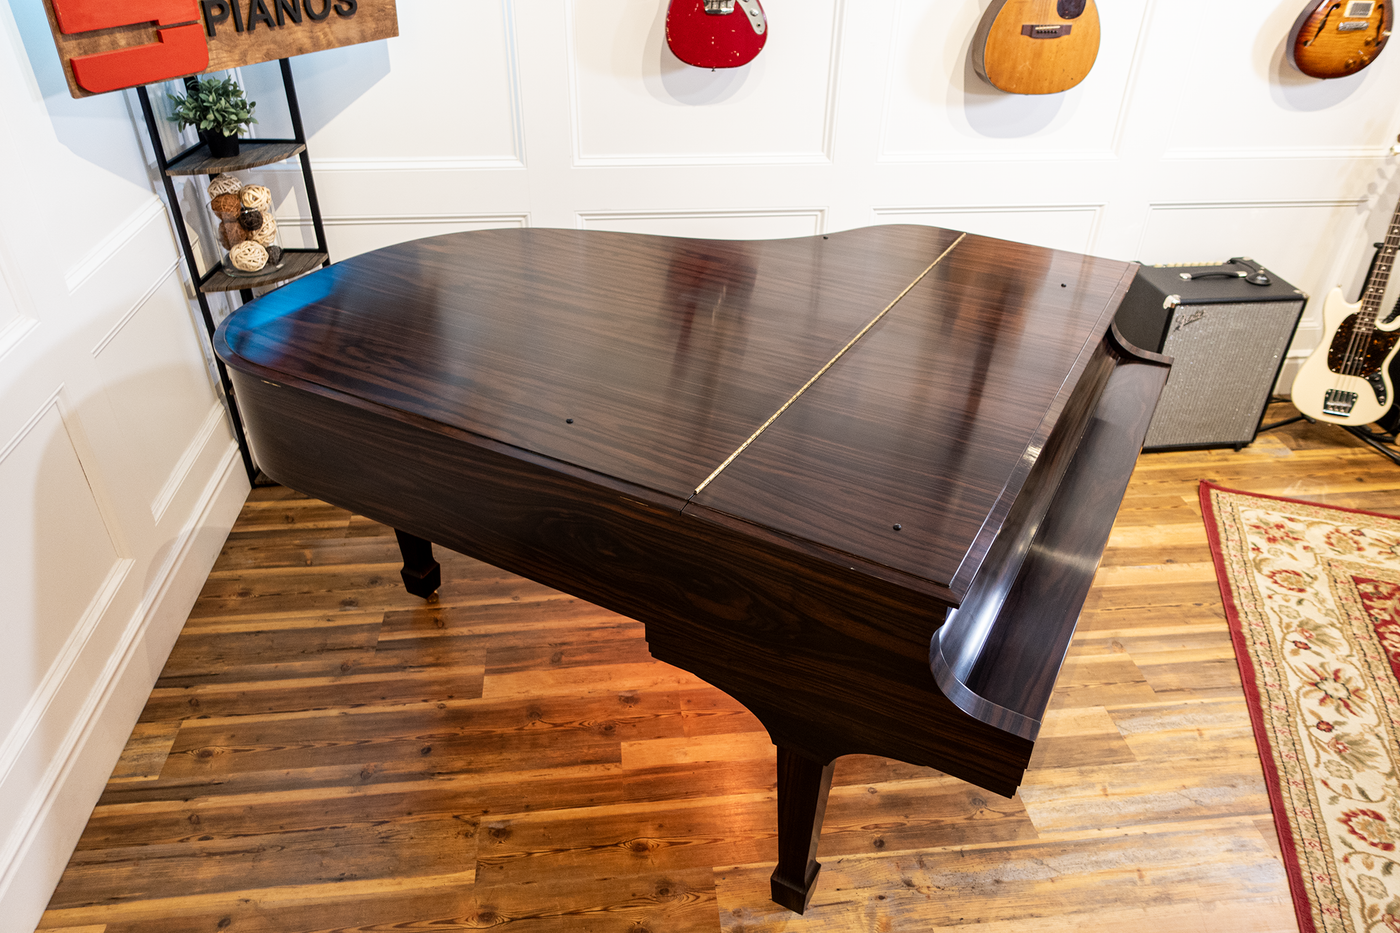 Steinway & Sons L Baby Grand Piano